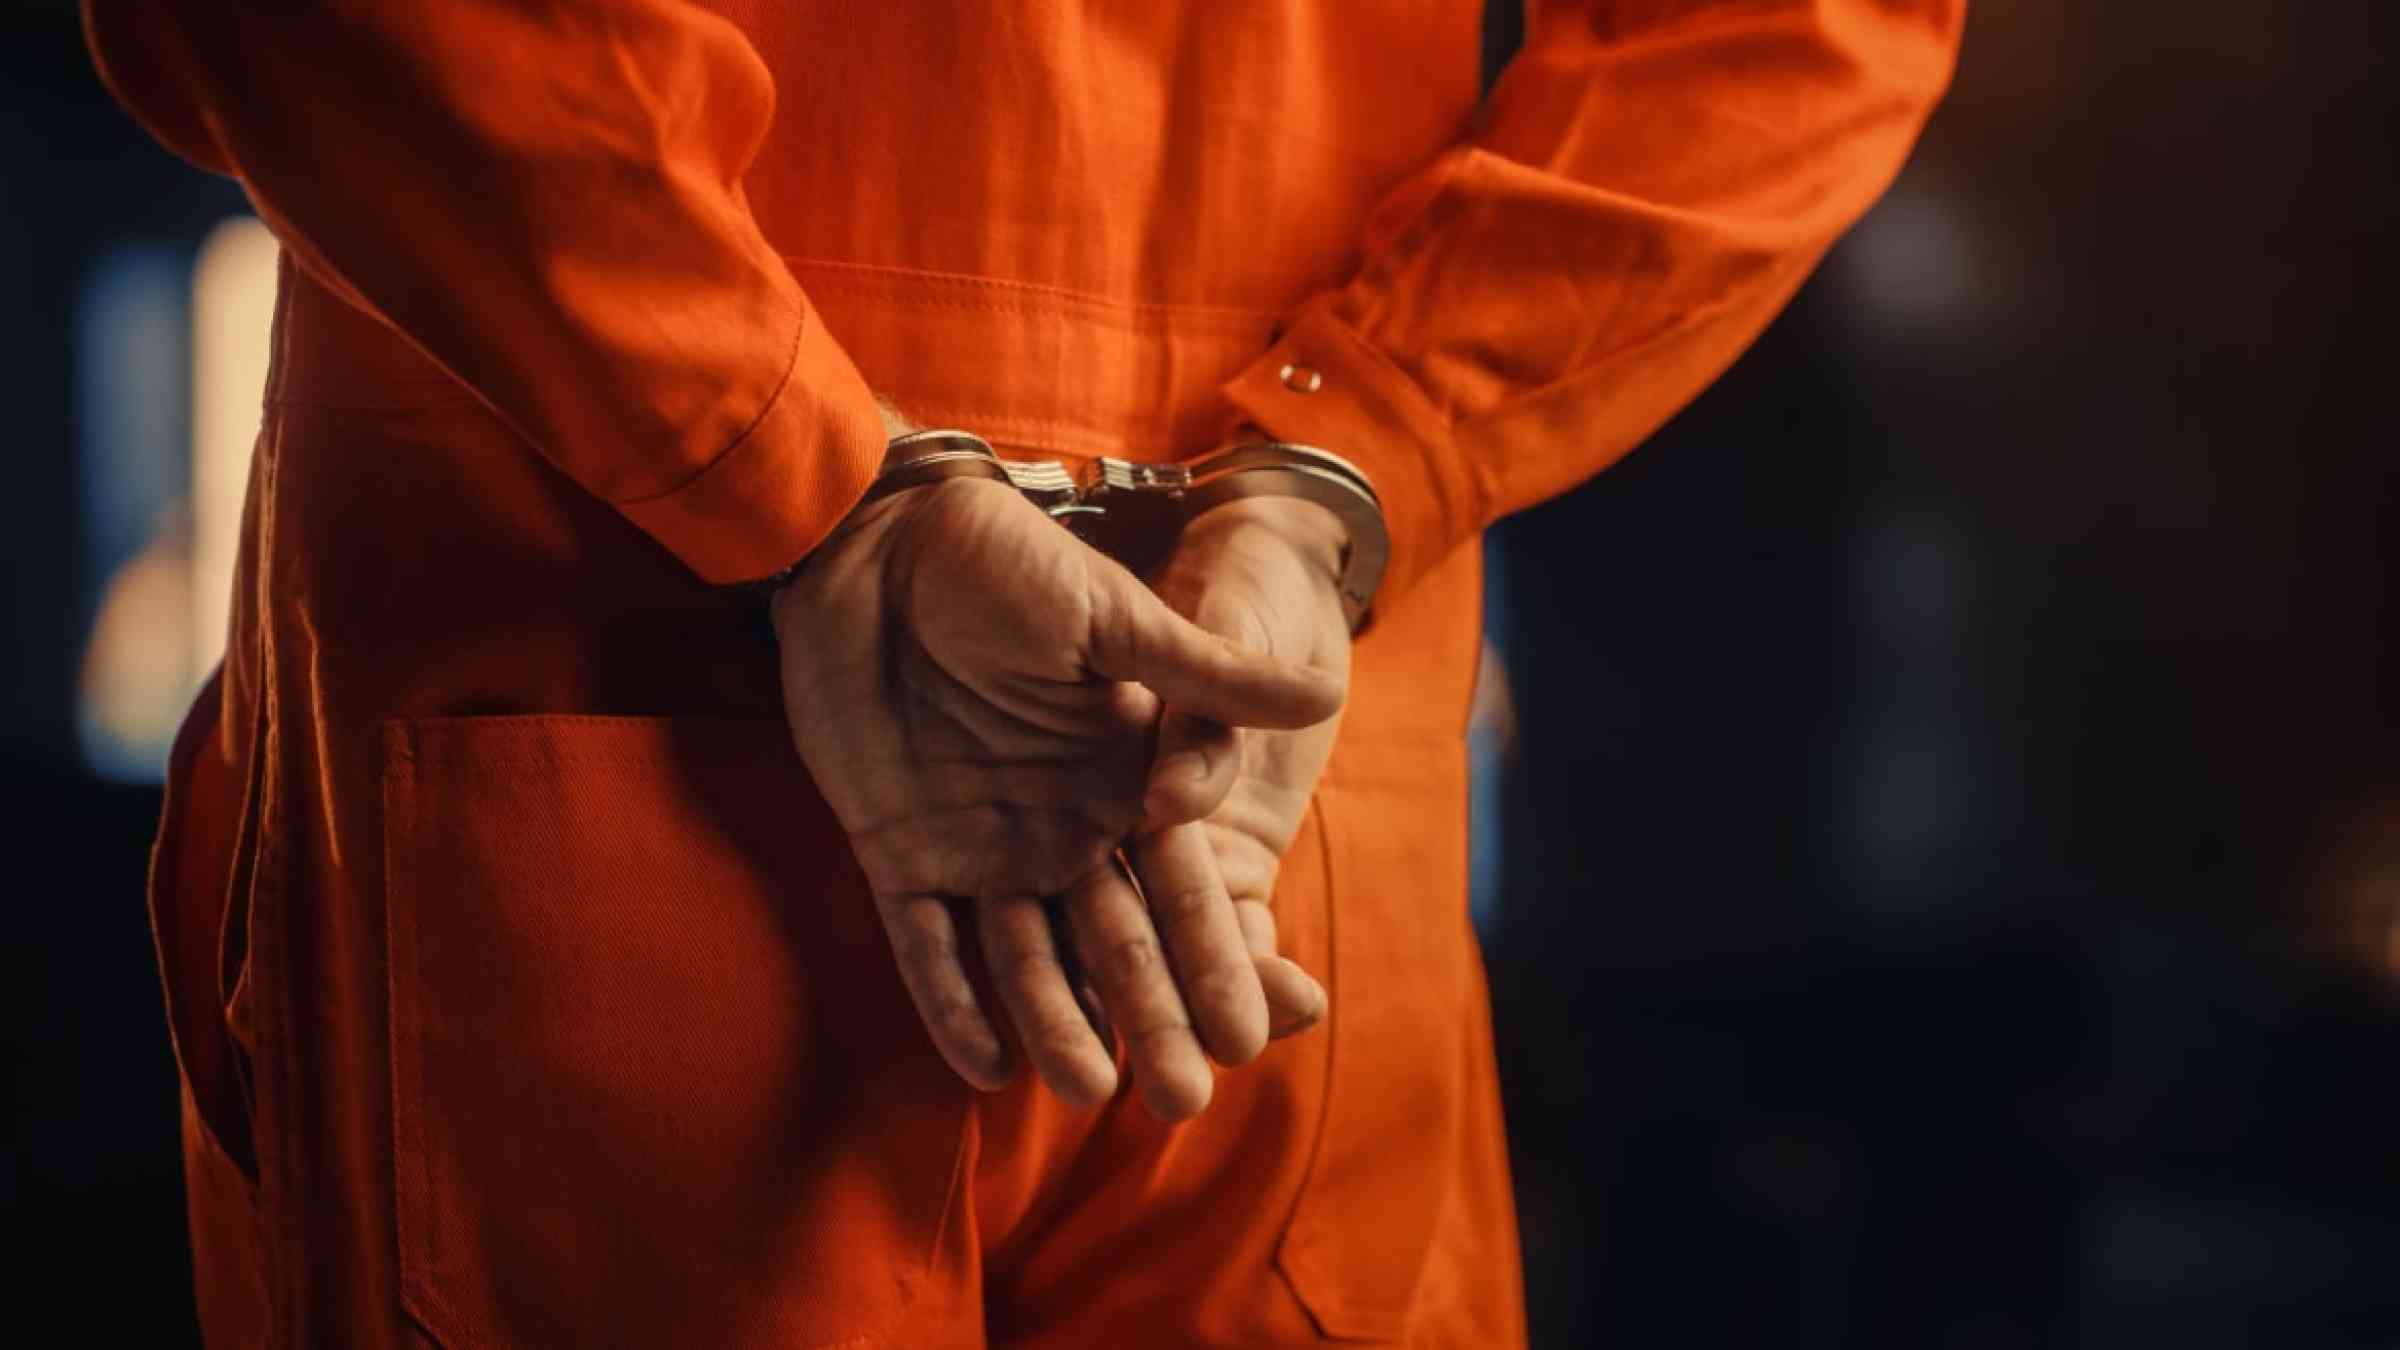 Prison inmate with handcuffs.